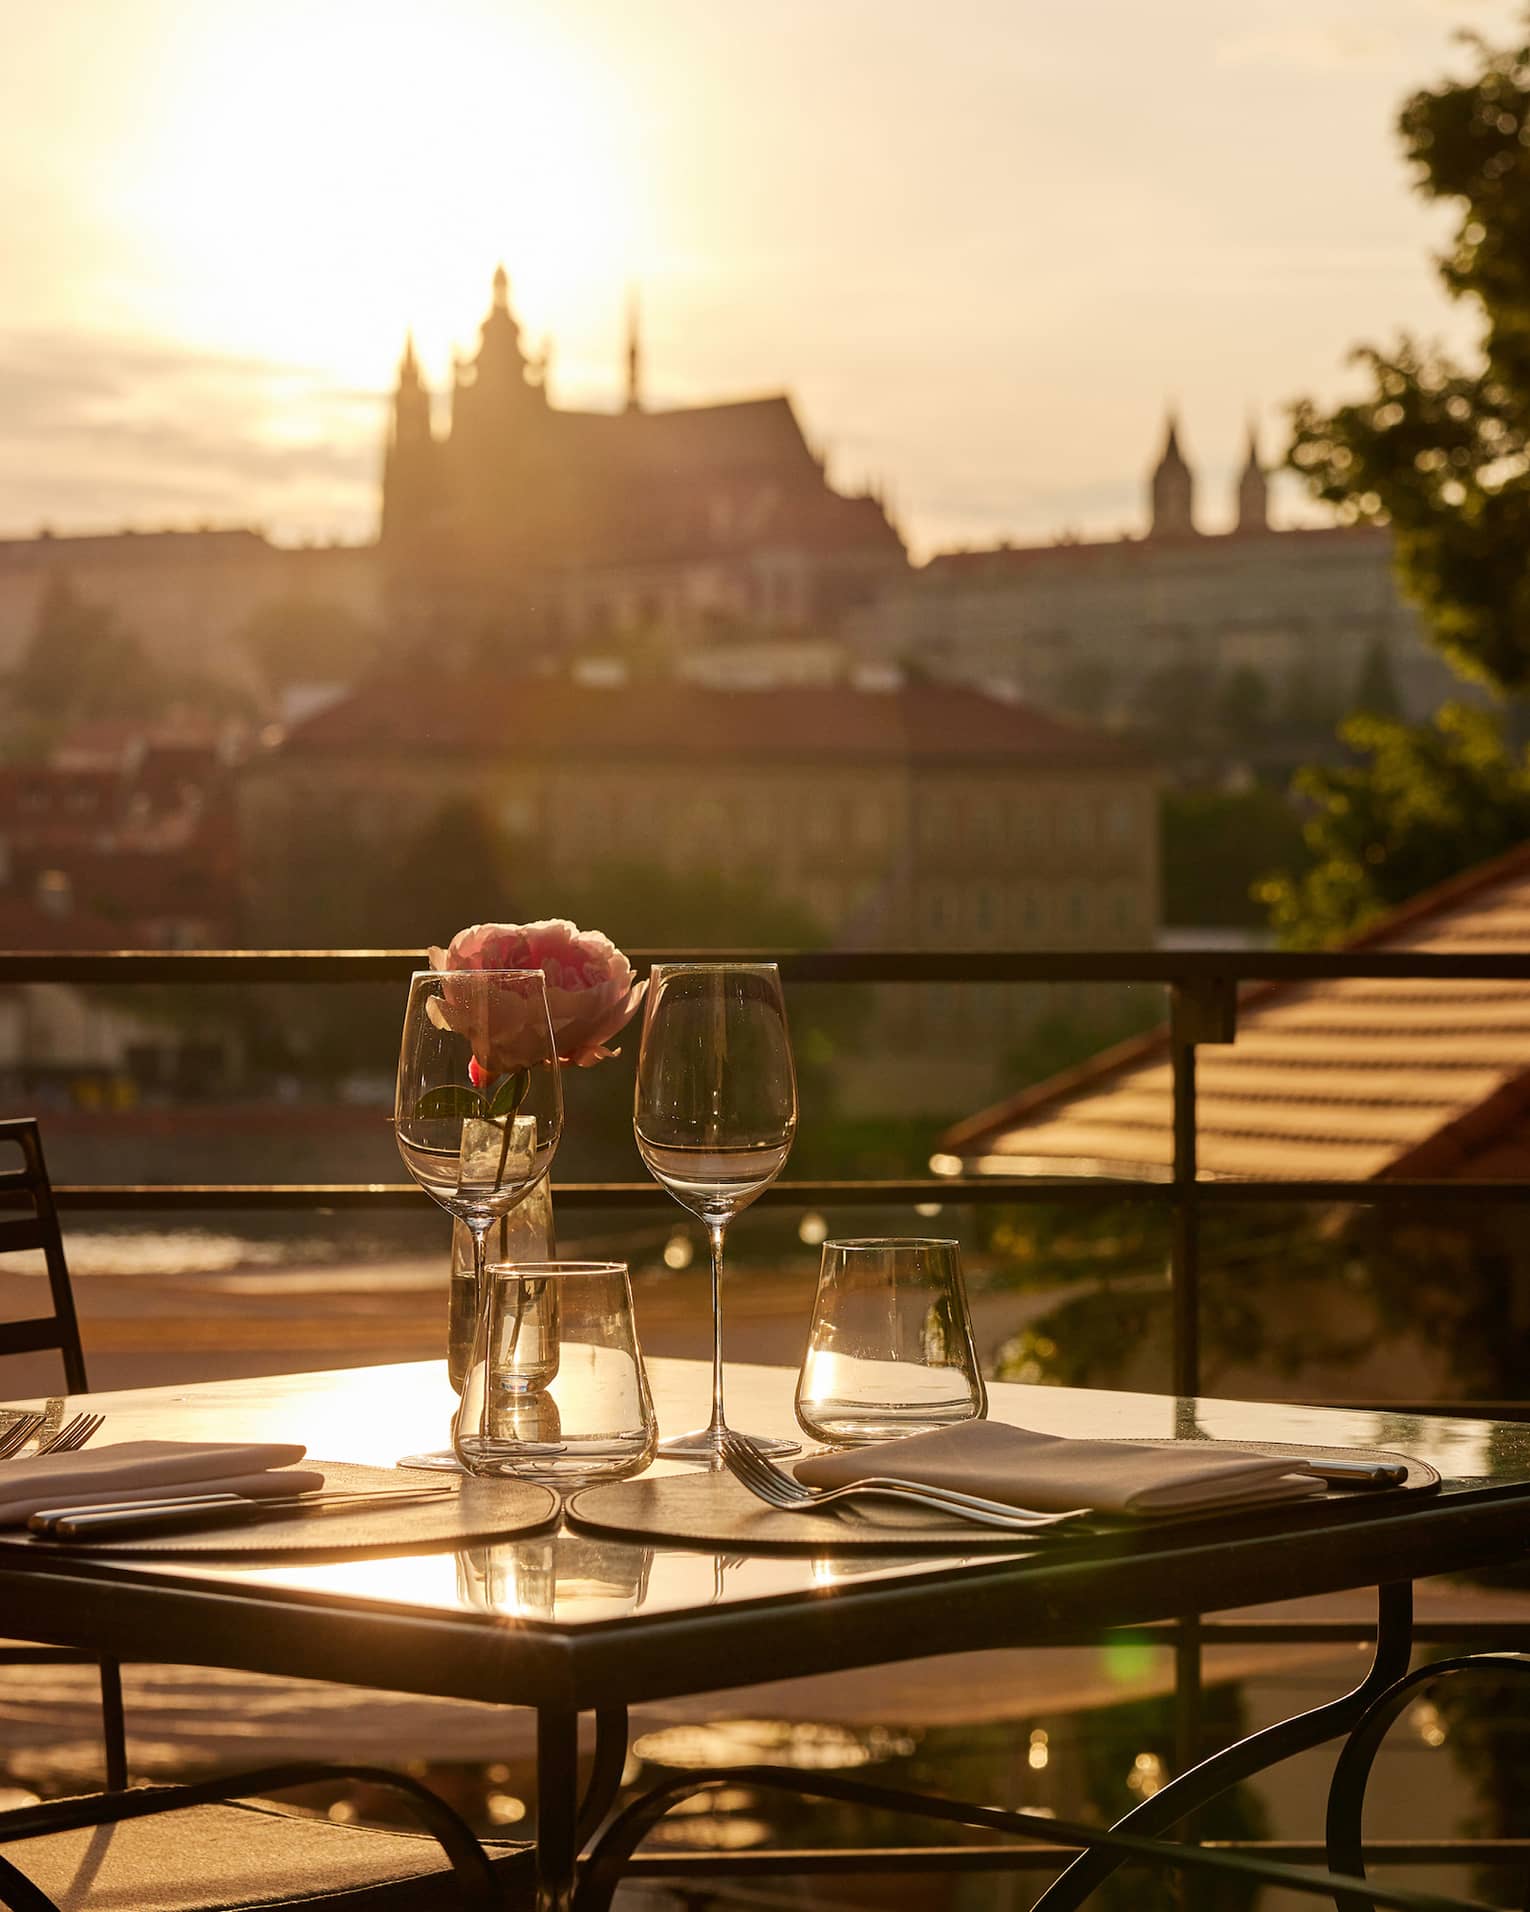 Terrace dining setup at sunset with view of Prague Castle in backdrop